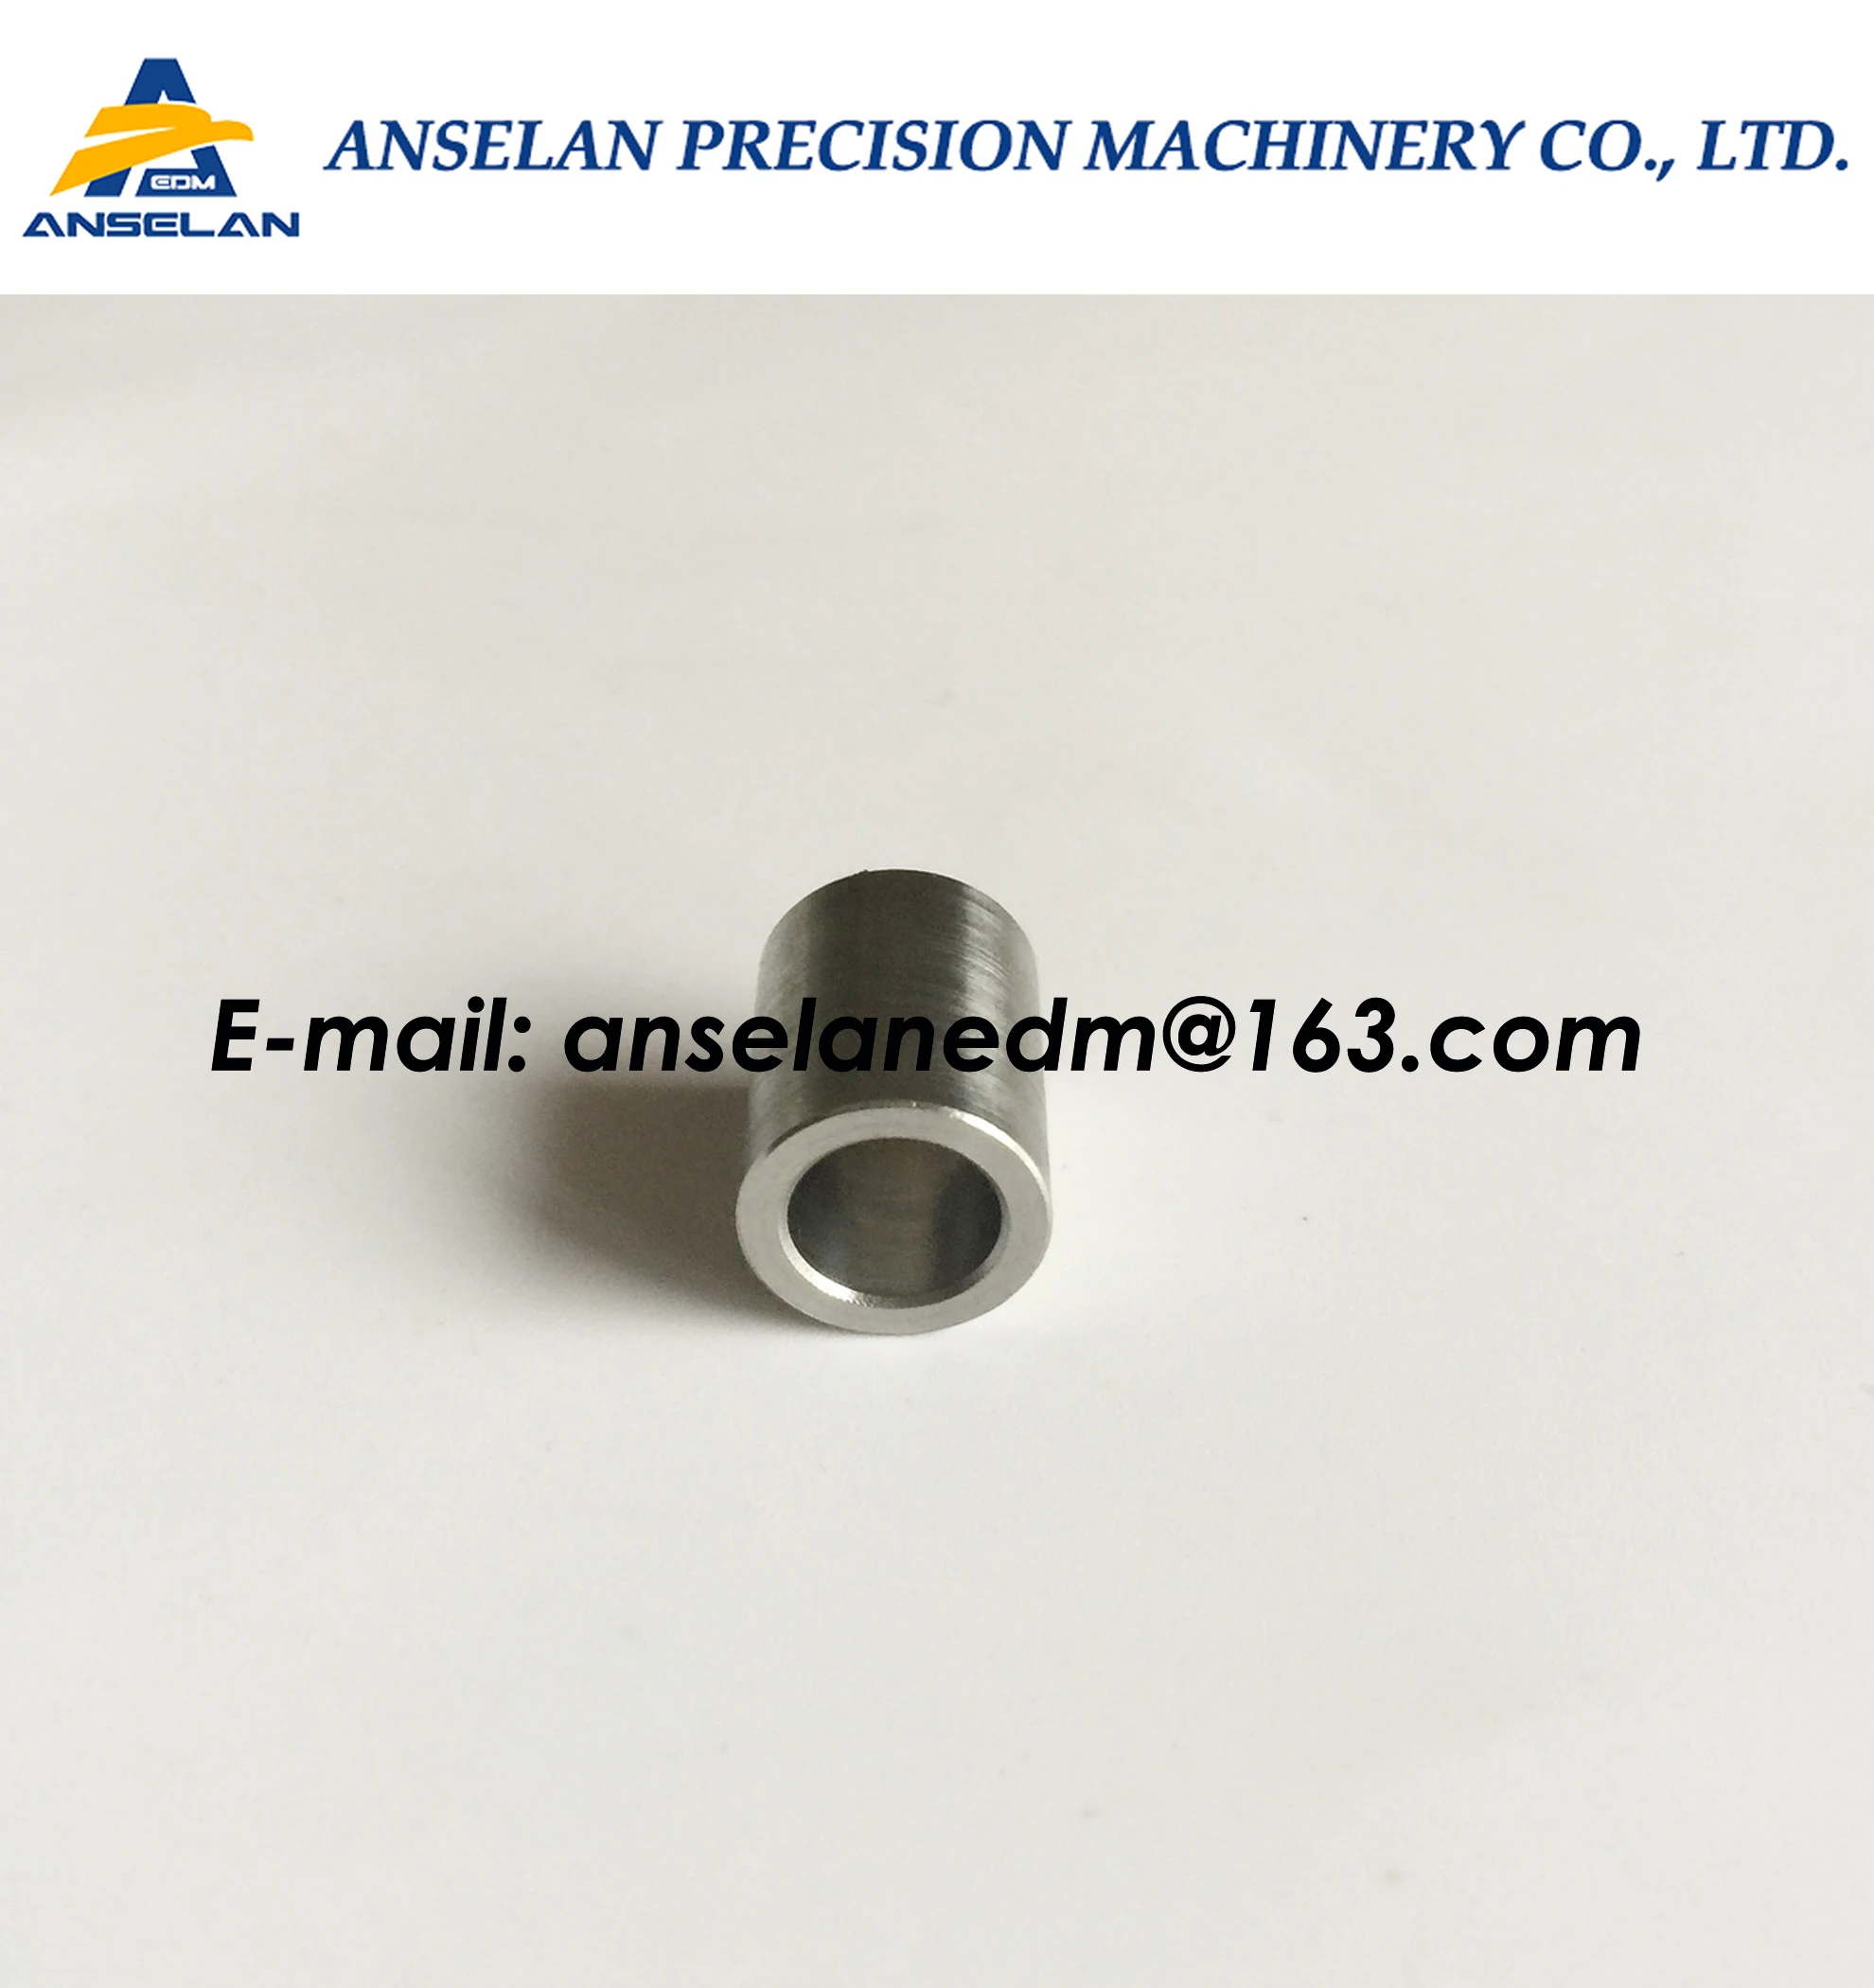 (2pcs/lot) 130003245 edm Ring (Stainles steel) for Robofil 190,290,300,310,390,500 Charmilles edm parts 130.003.245 for Lower